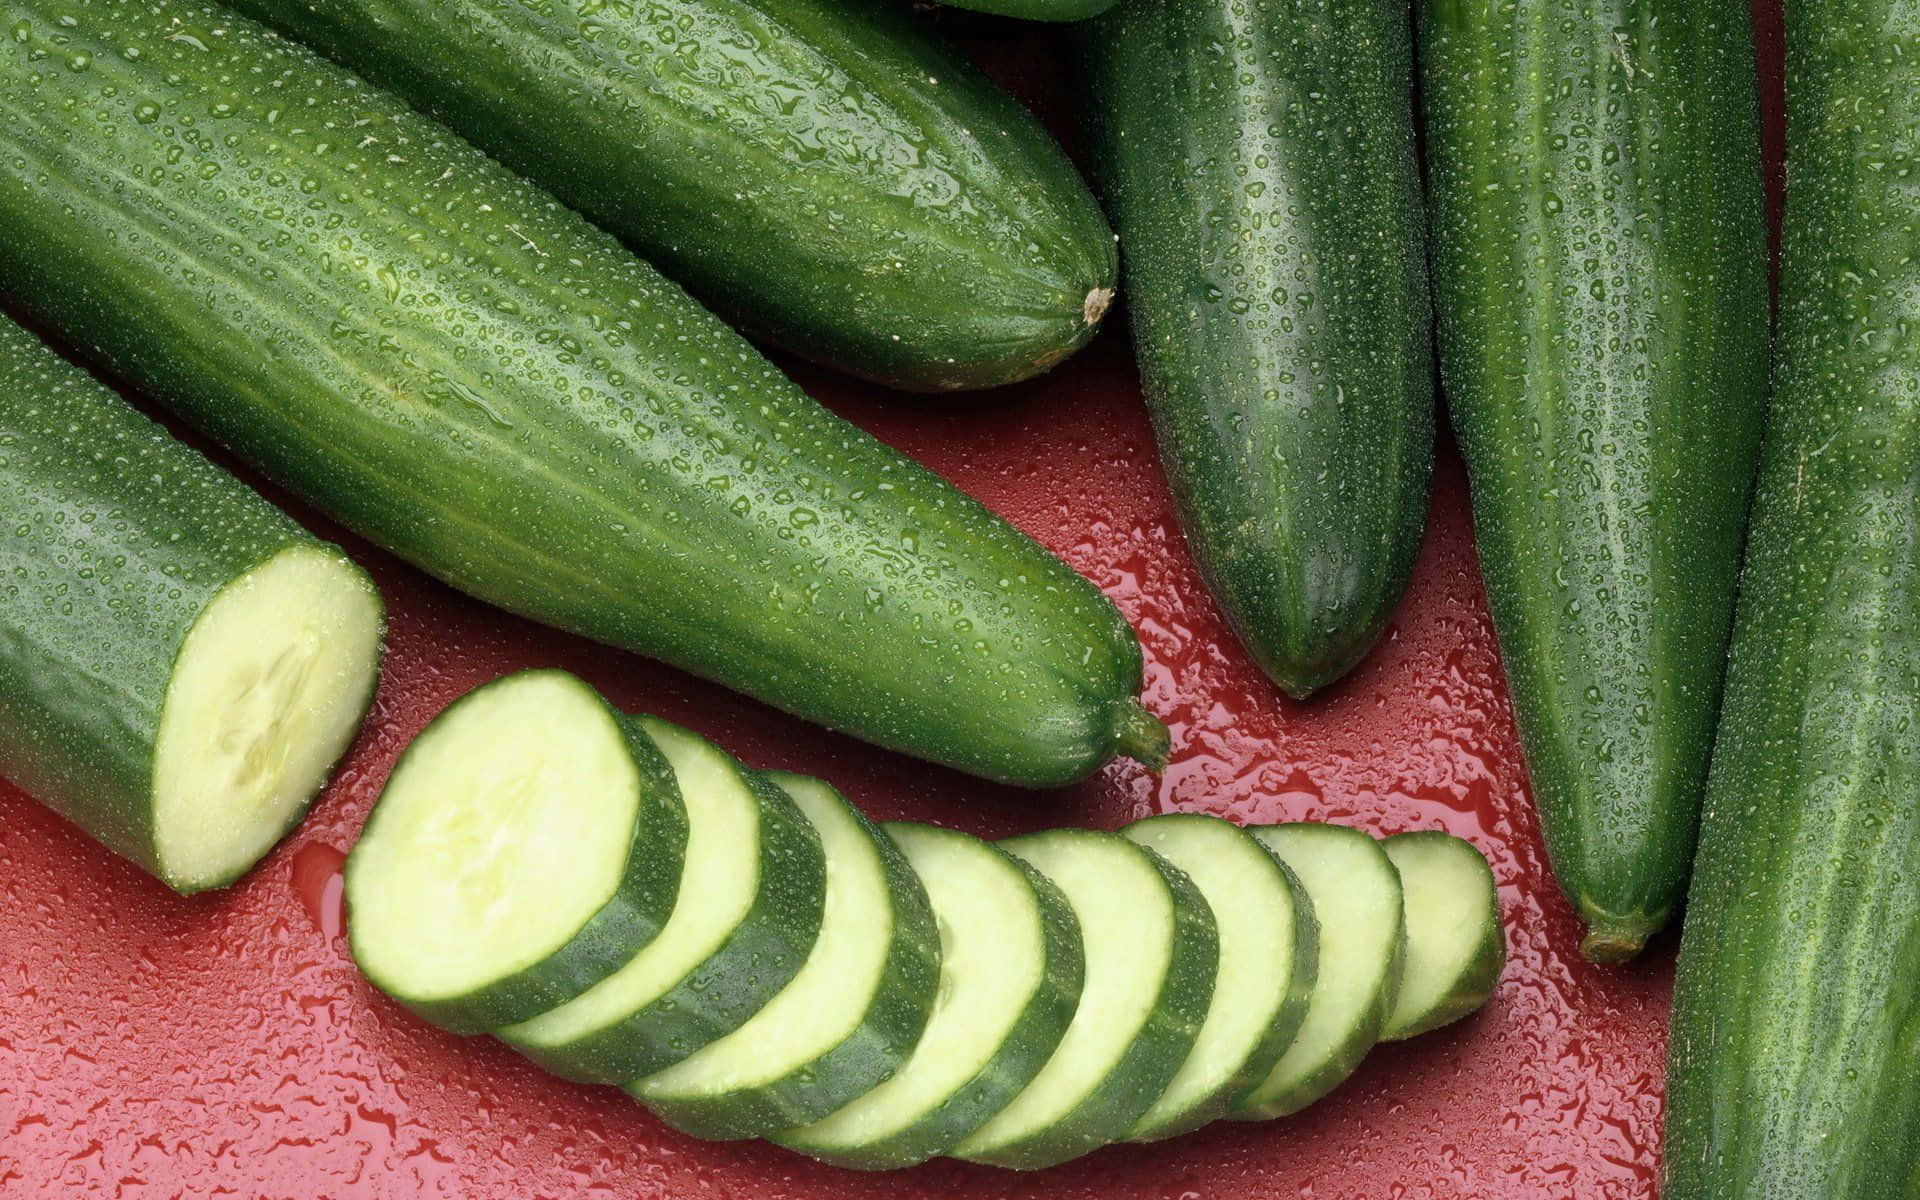 Cucumbers Are Sliced And Placed On A Red Surface